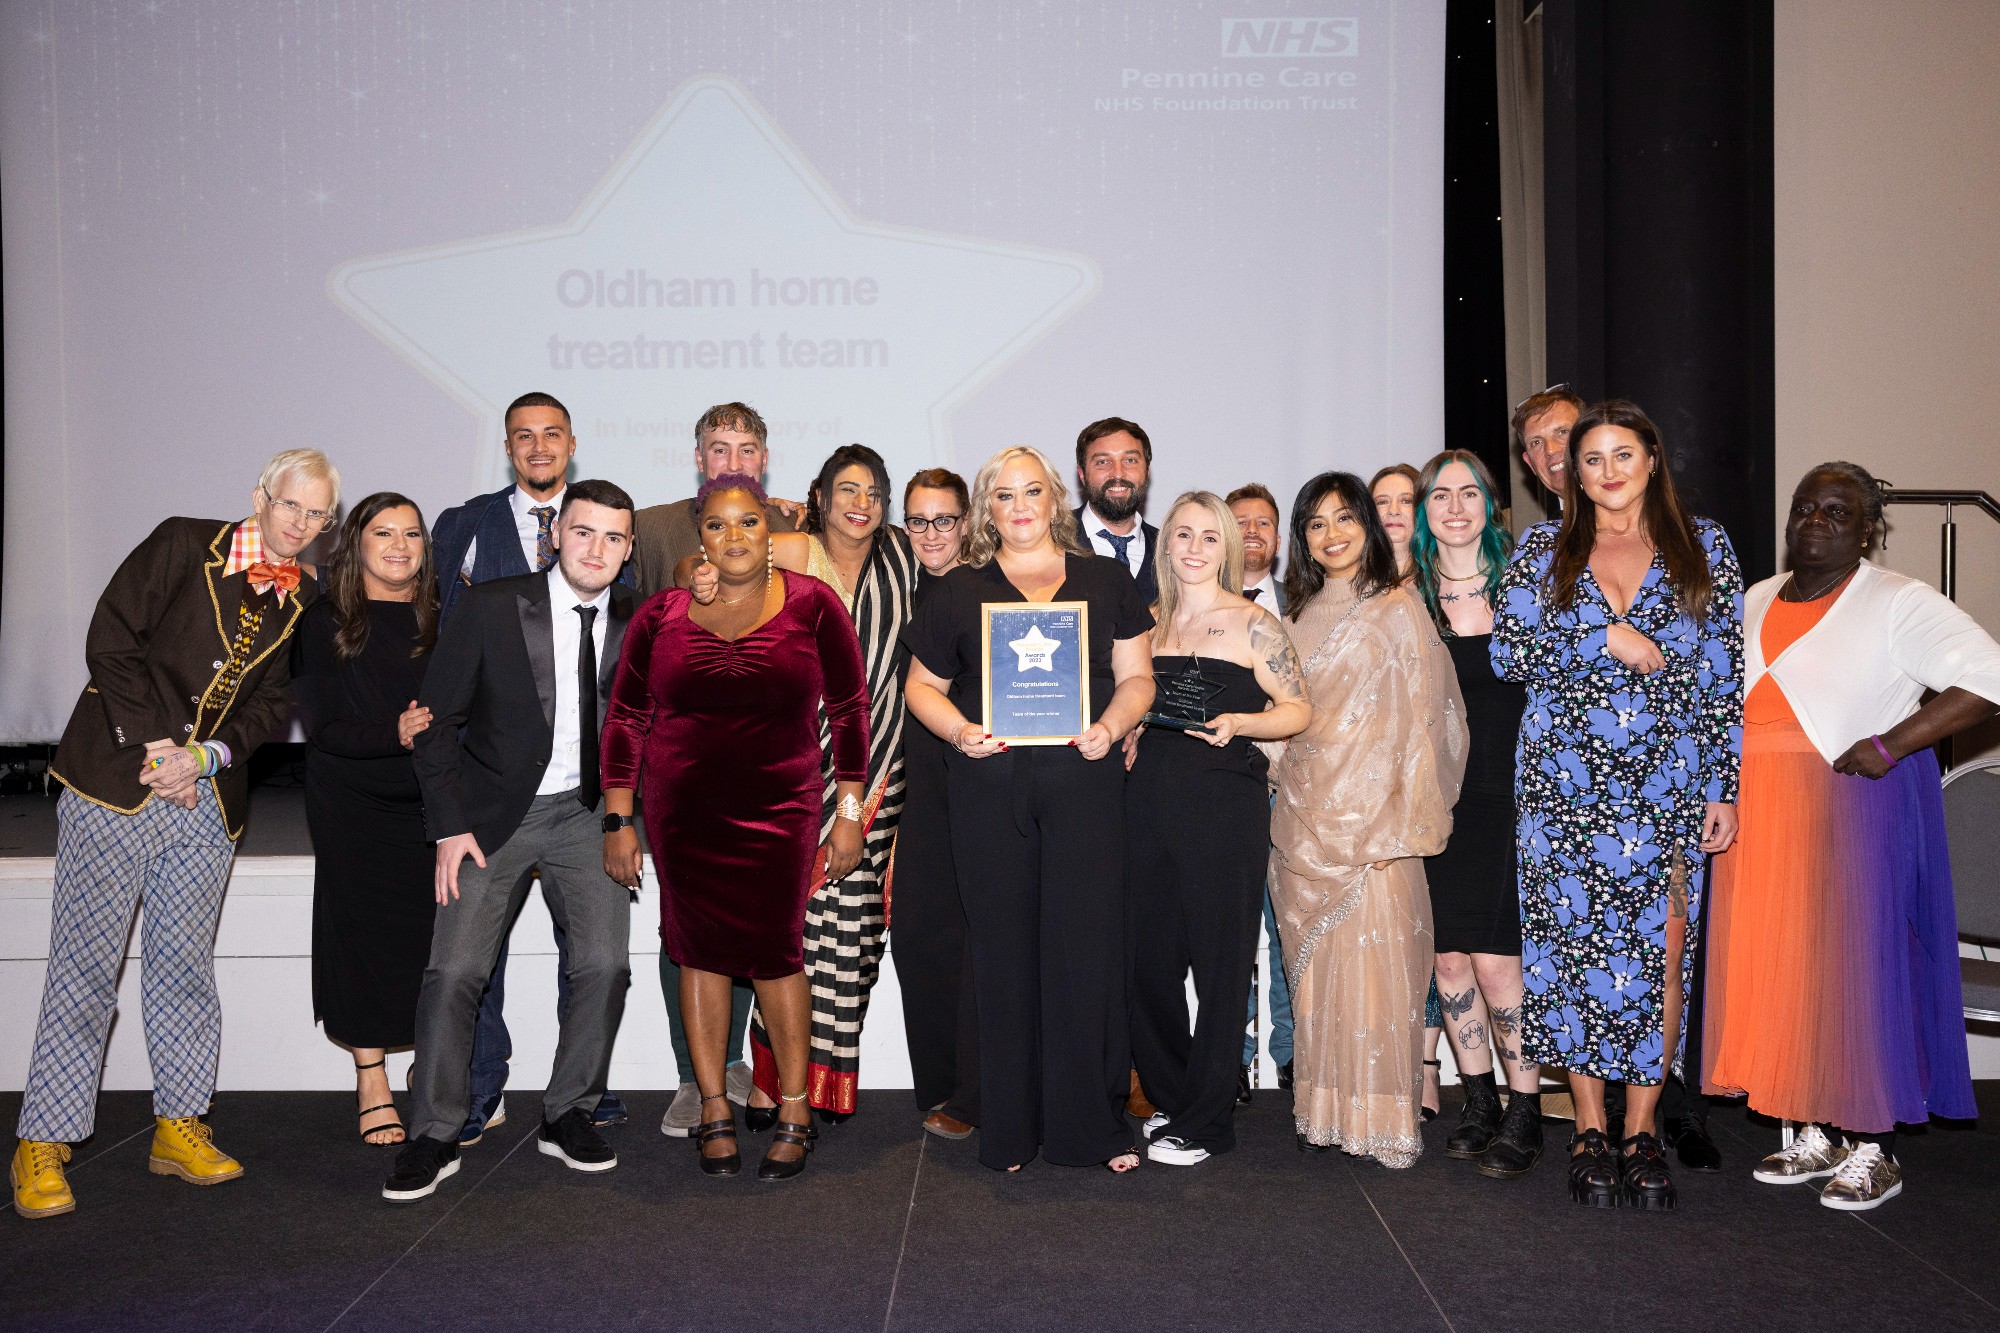 Team of the year - Oldham home treatment team